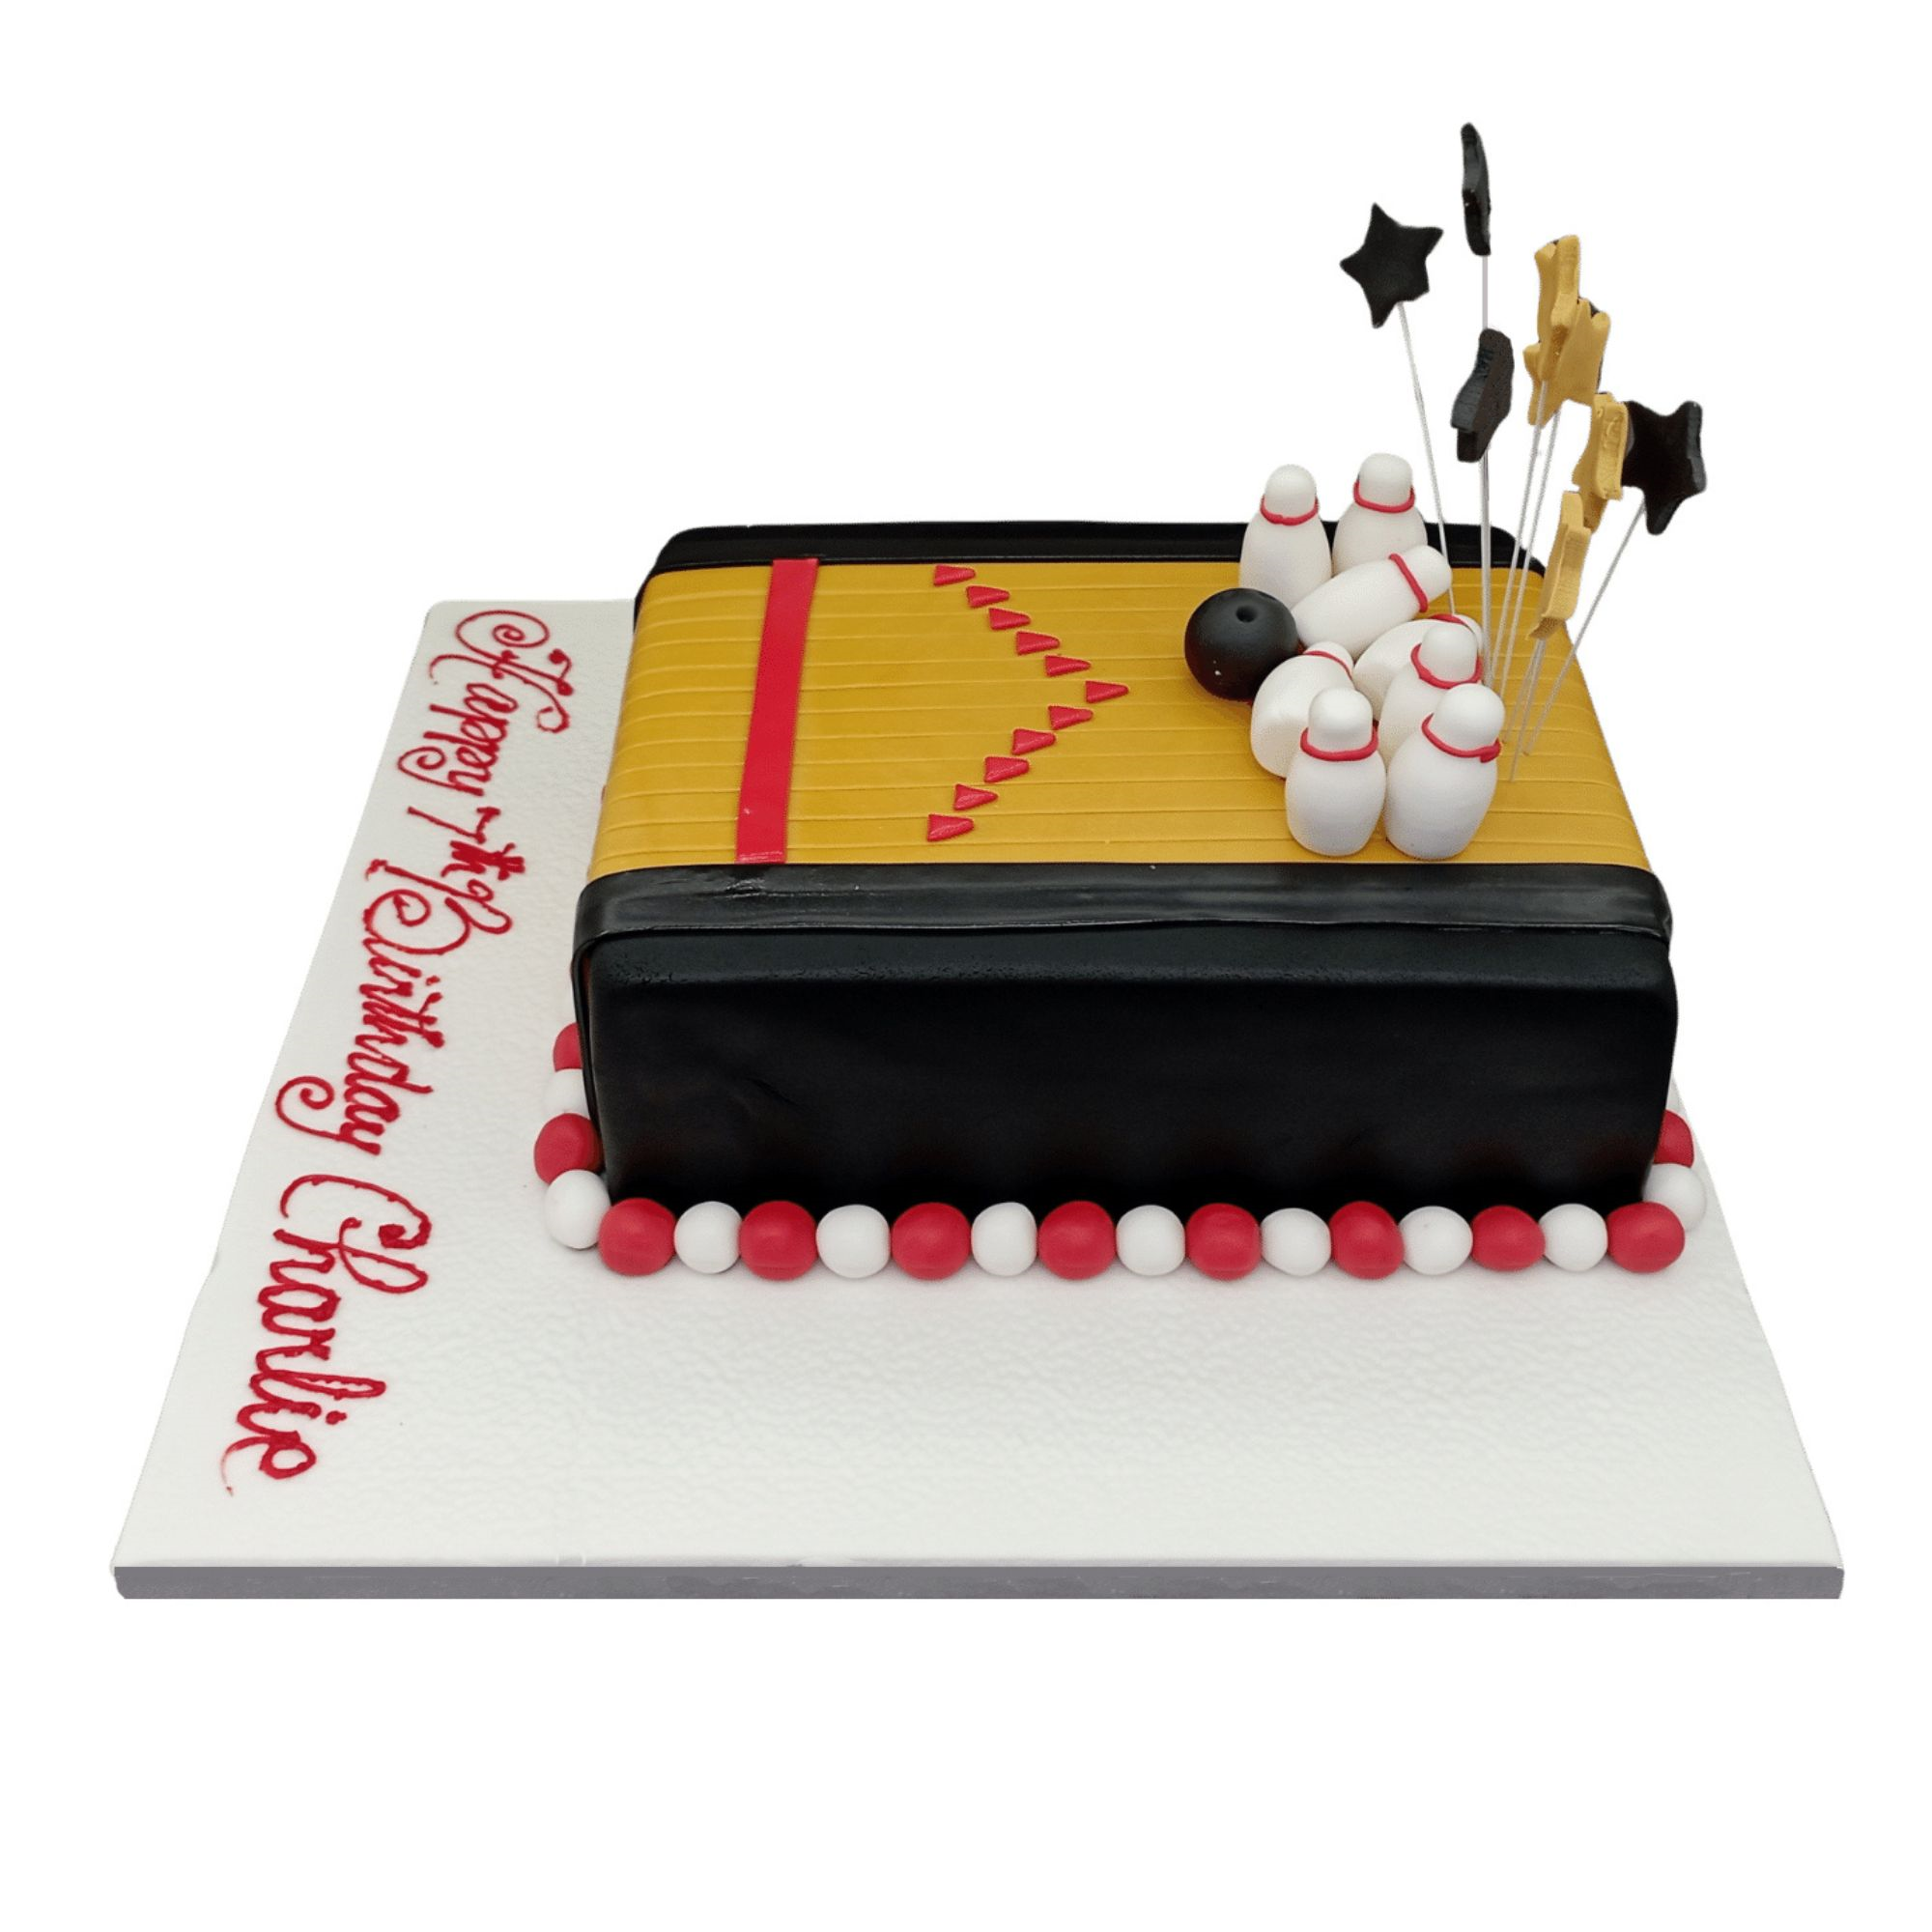 Bowling alley cake